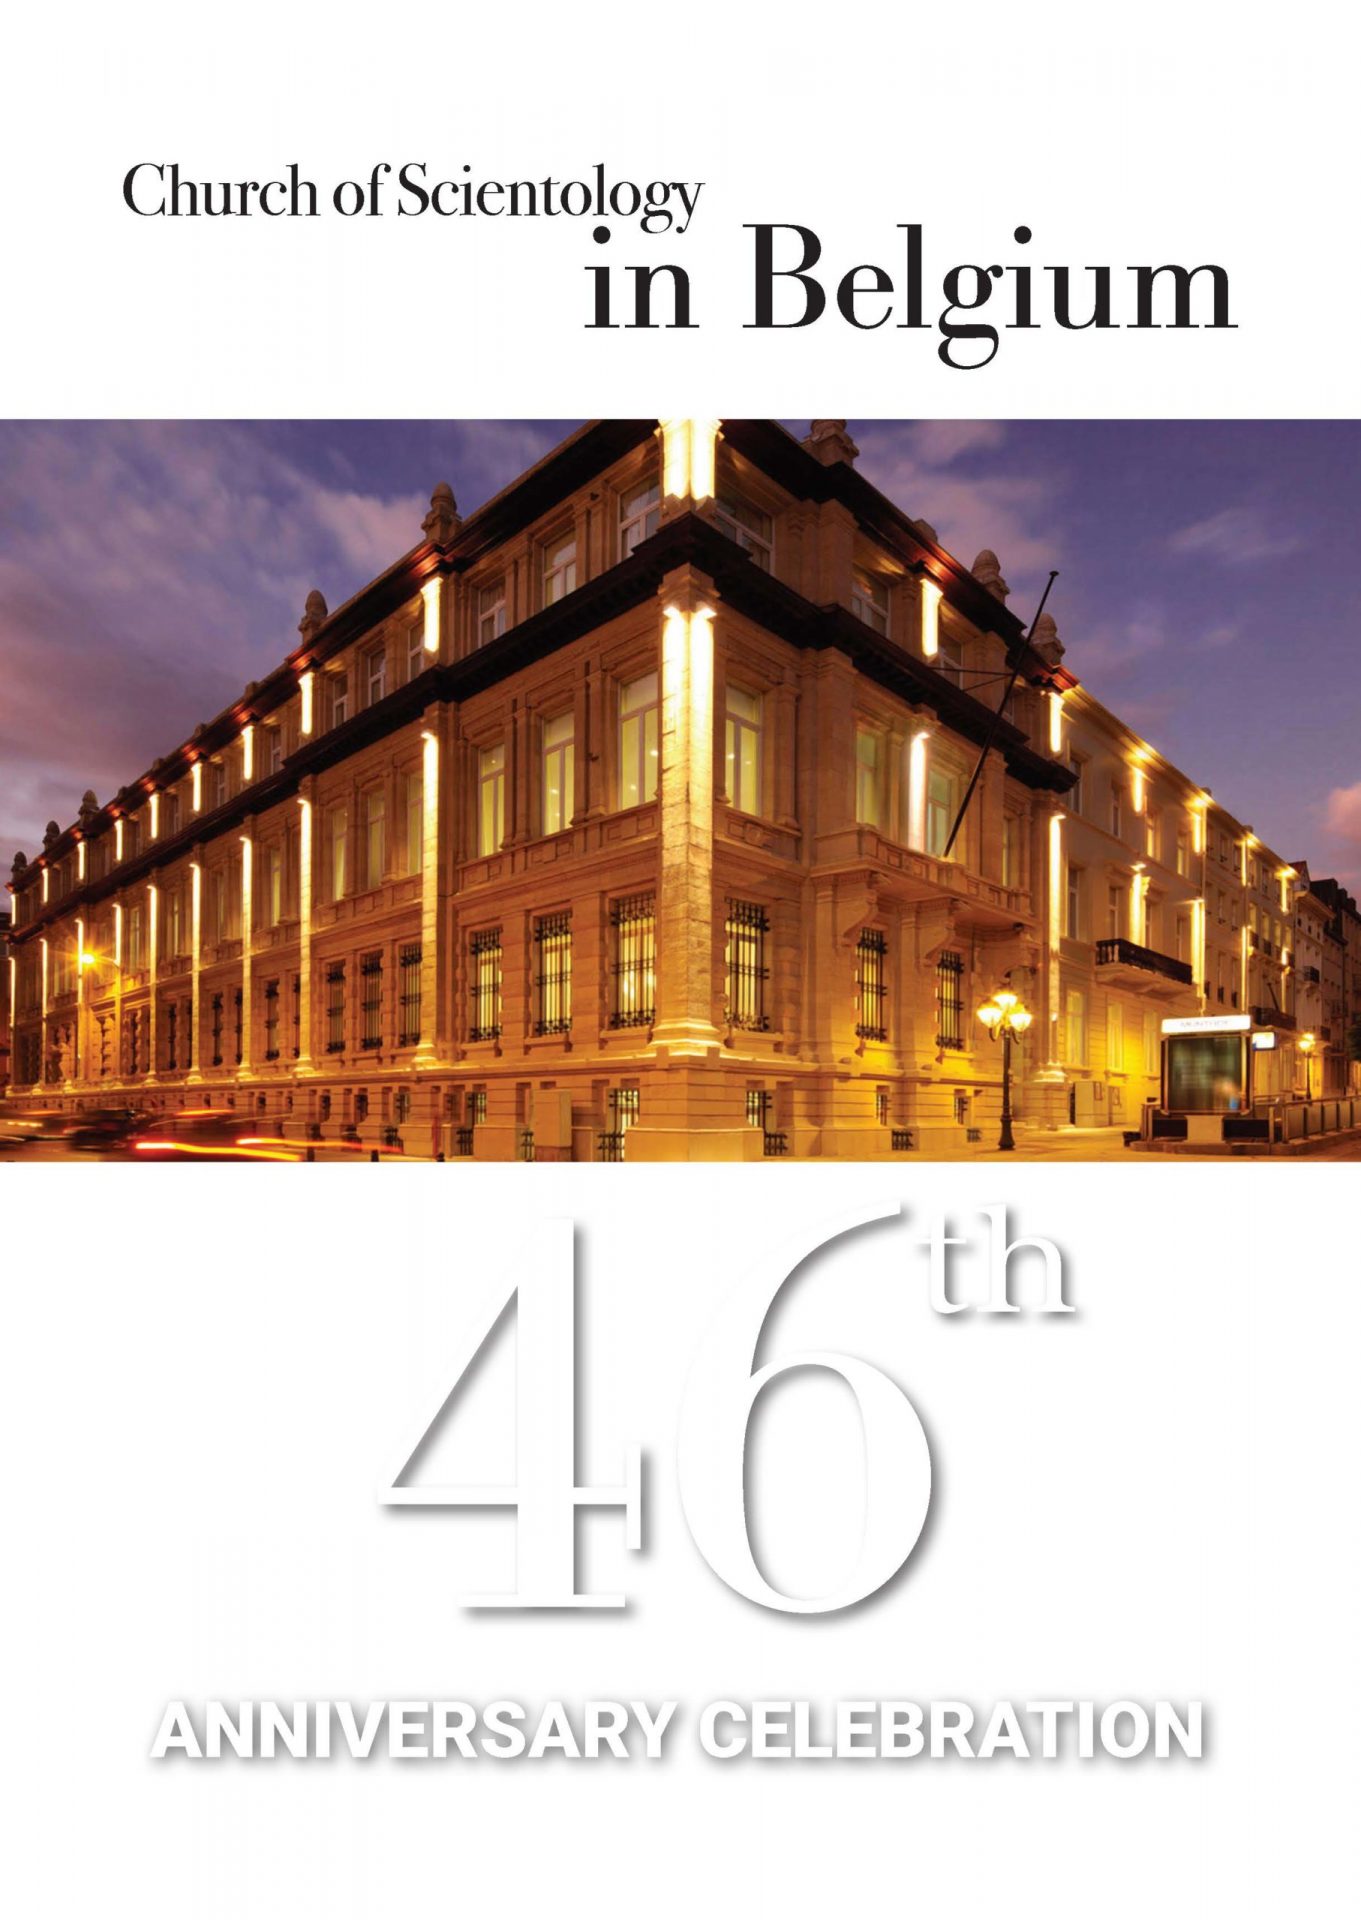 Celebration of the 46th Anniversary of the Church of Scientology in Belgium